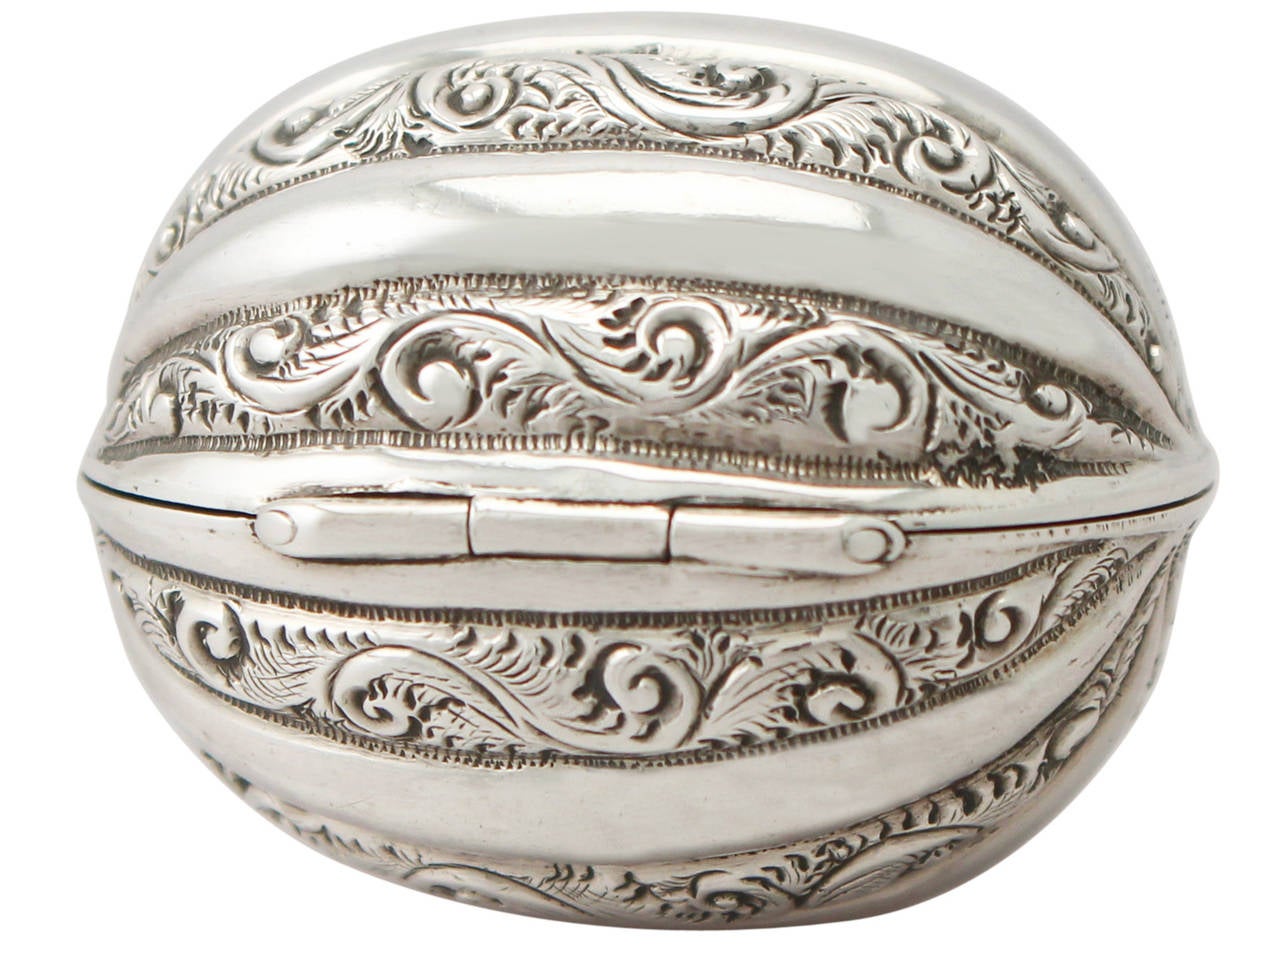 A fine and impressive antique Victorian English sterling silver nutmeg grater in the form of a natural nutmeg; an addition to our diverse silver box collection

This fine antique Victorian sterling silver nutmeg grater has been modelled in the